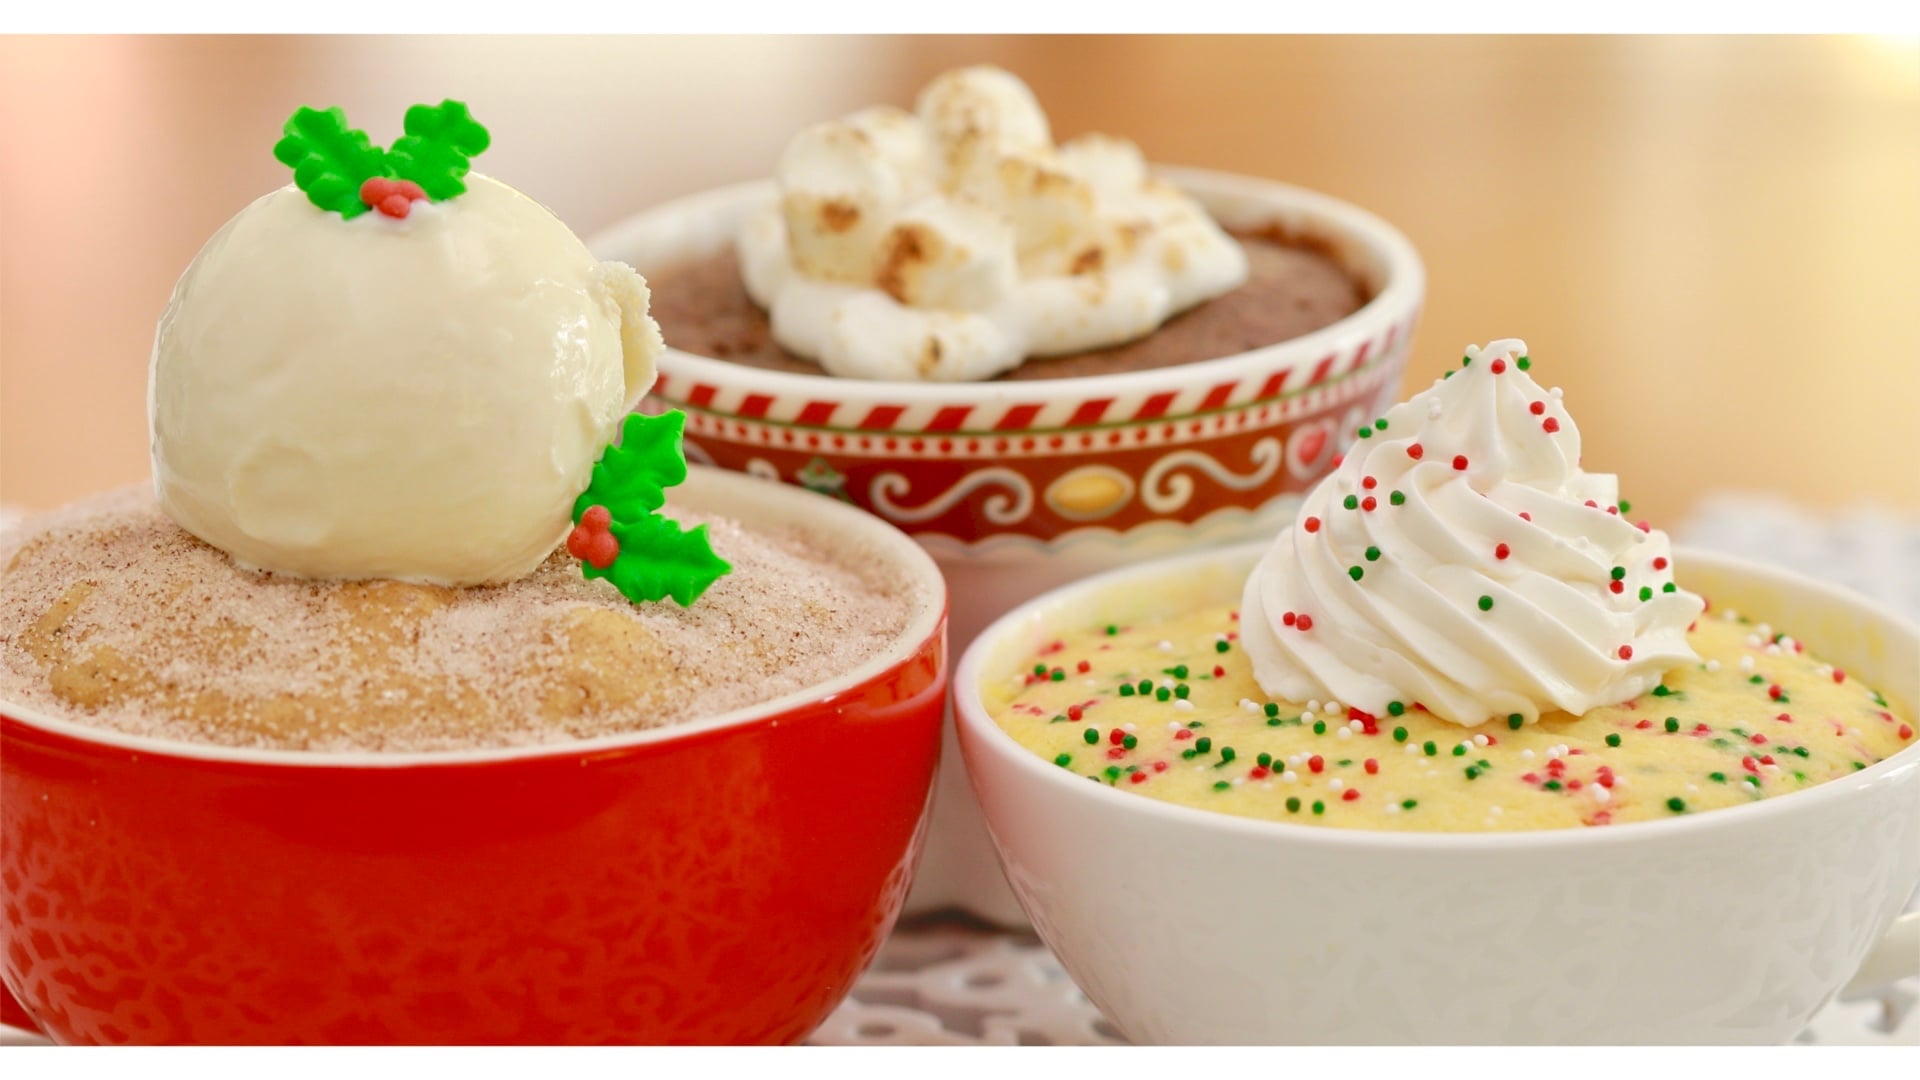 Want a Christmas cookie in less than 1 minute? Check out the Microwave Mug Cookies!!